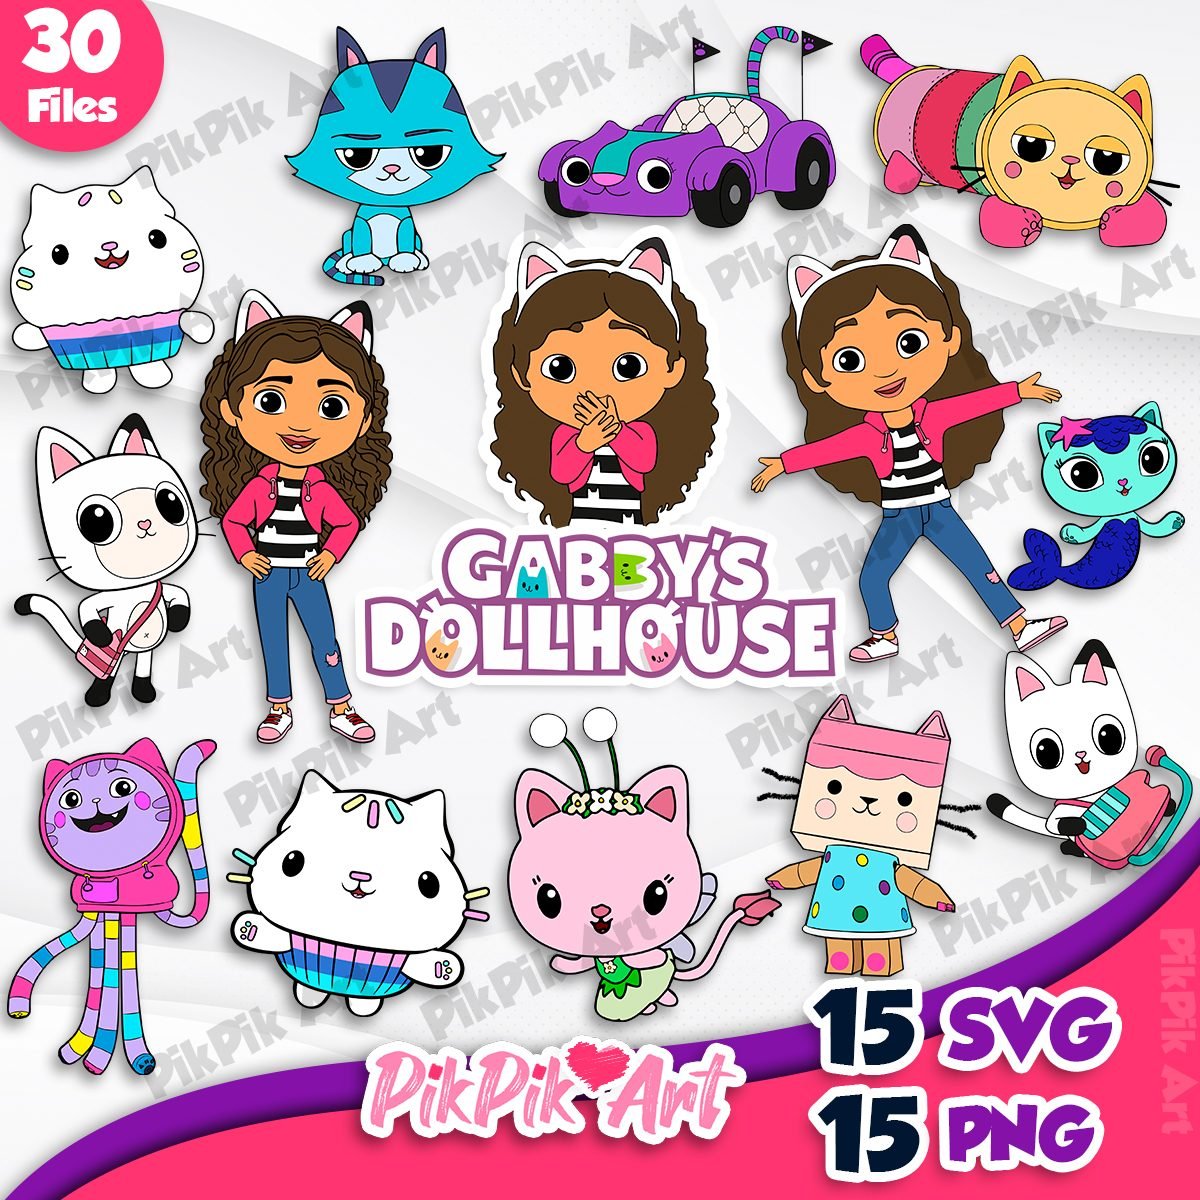 Gabby's Dollhouse Archives - postPerspective